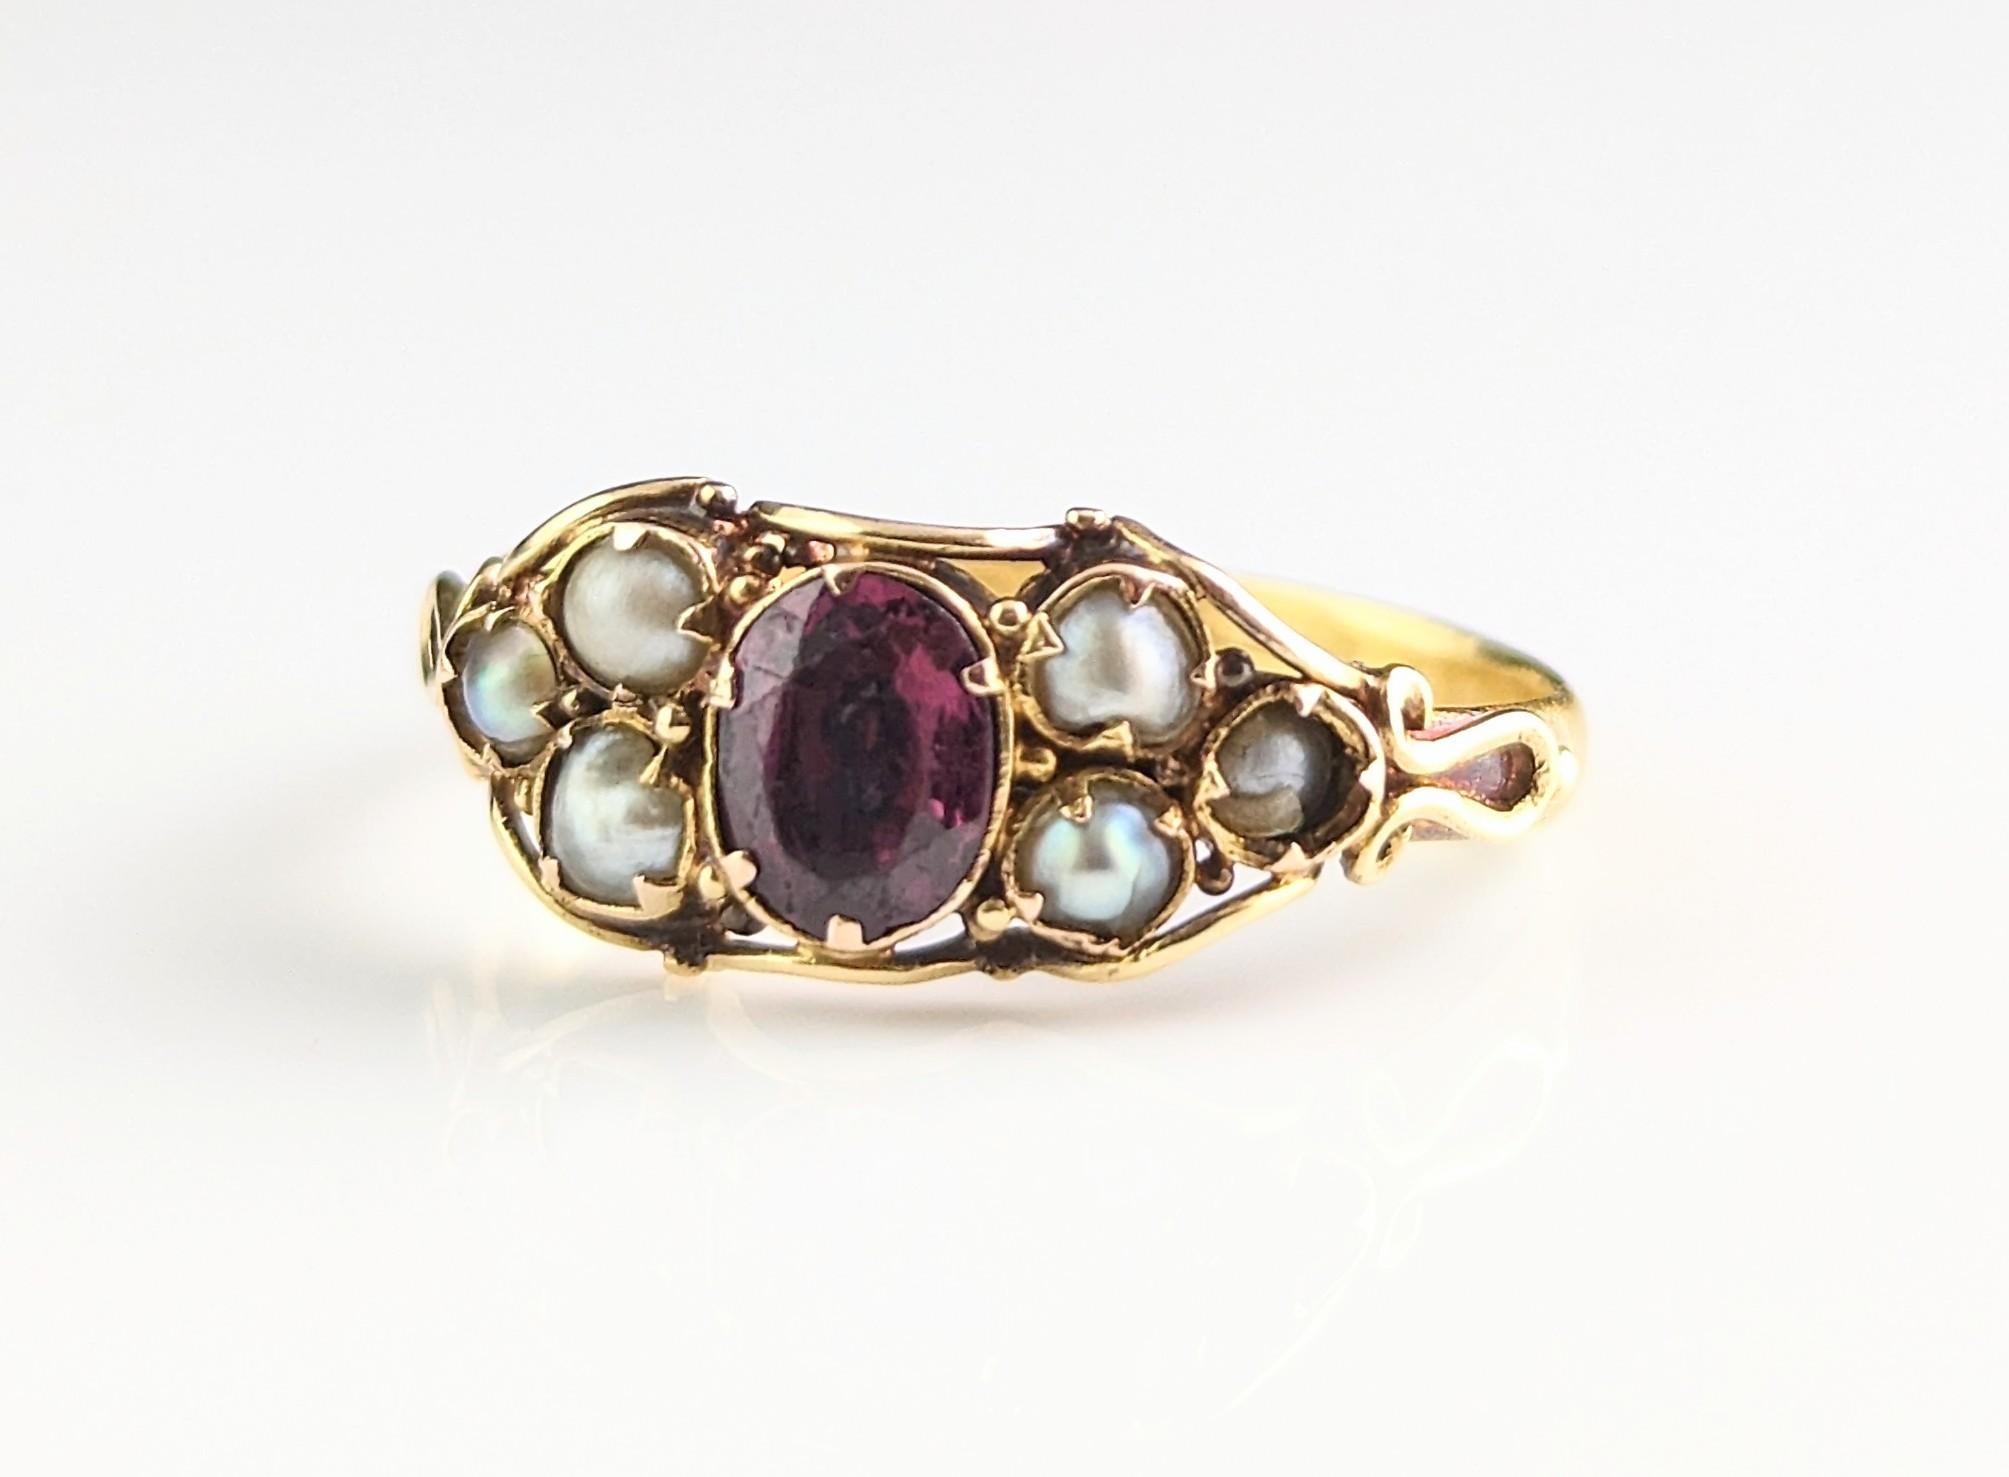 Antique Almandine Garnet and Pearl Ring, 22k Yellow Gold 6